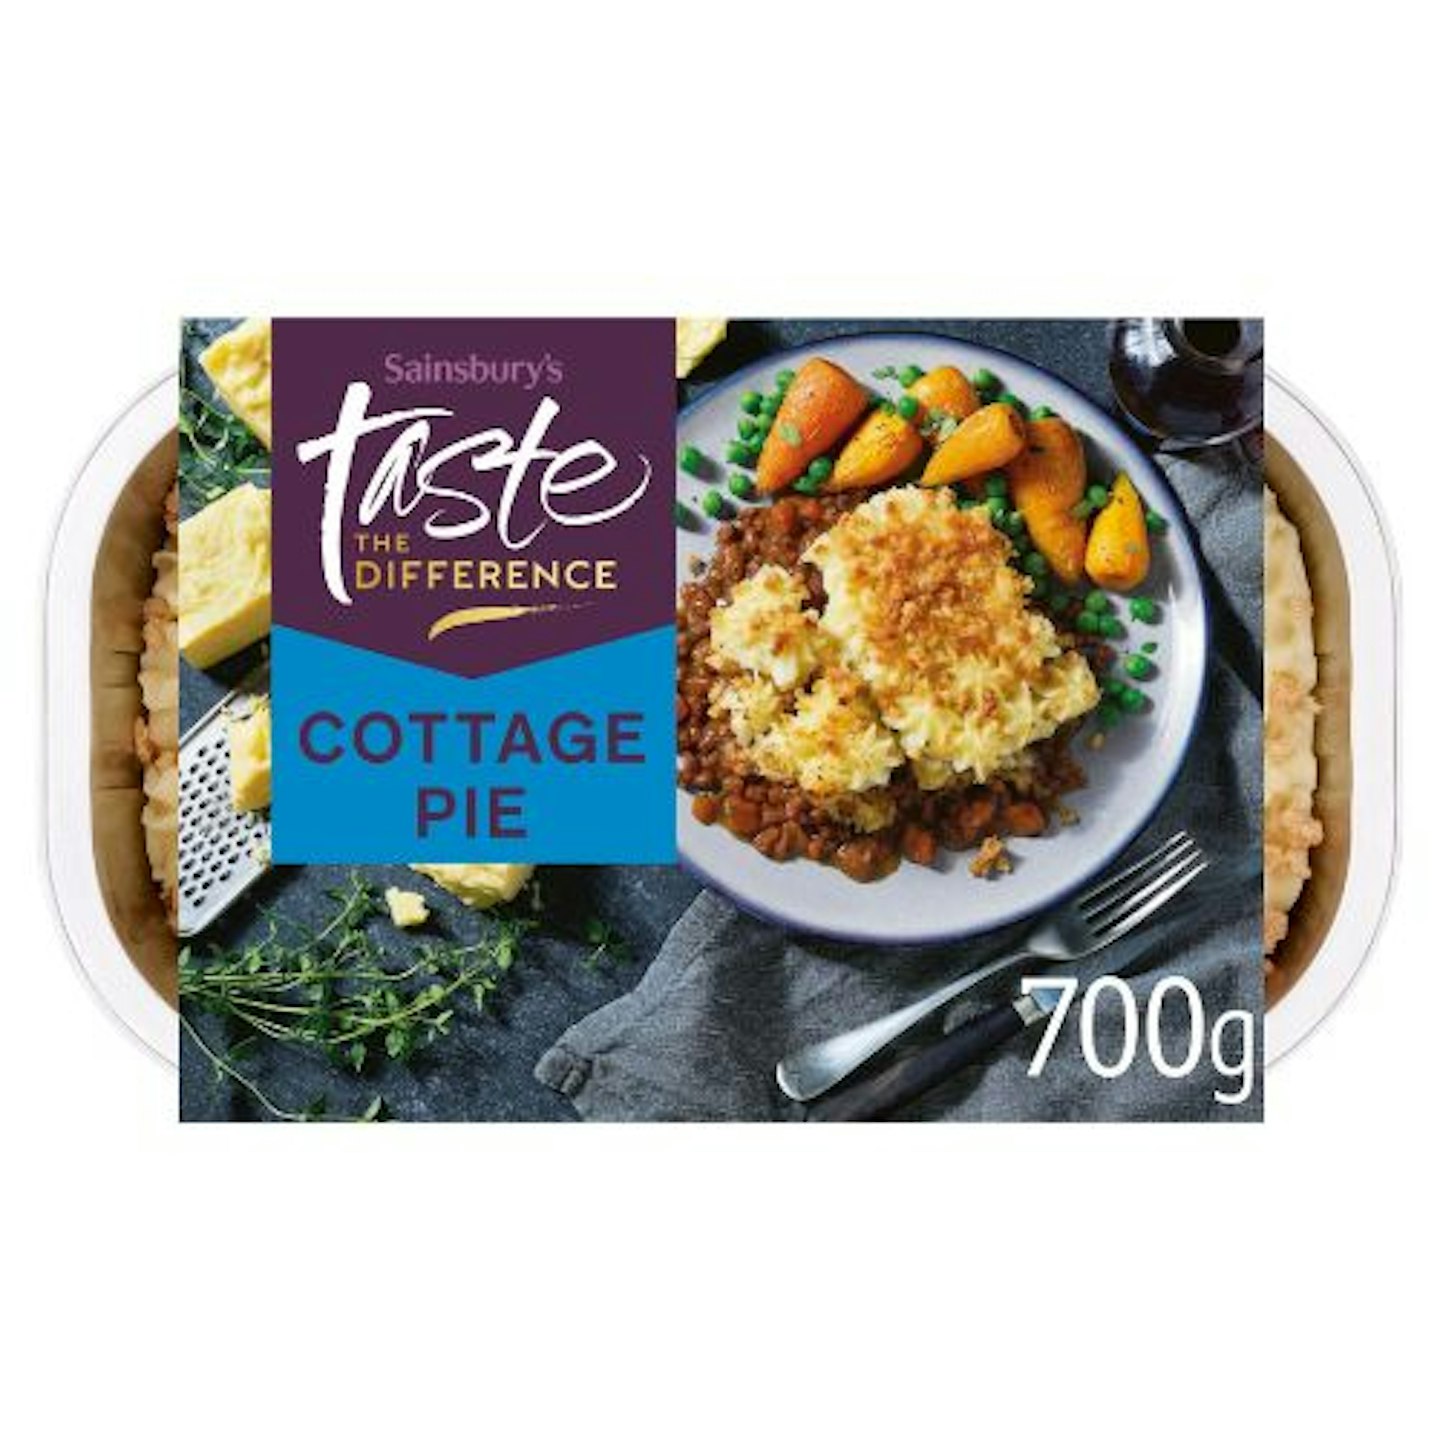 Sainsbury's Cottage Pie, Taste the Difference 700g